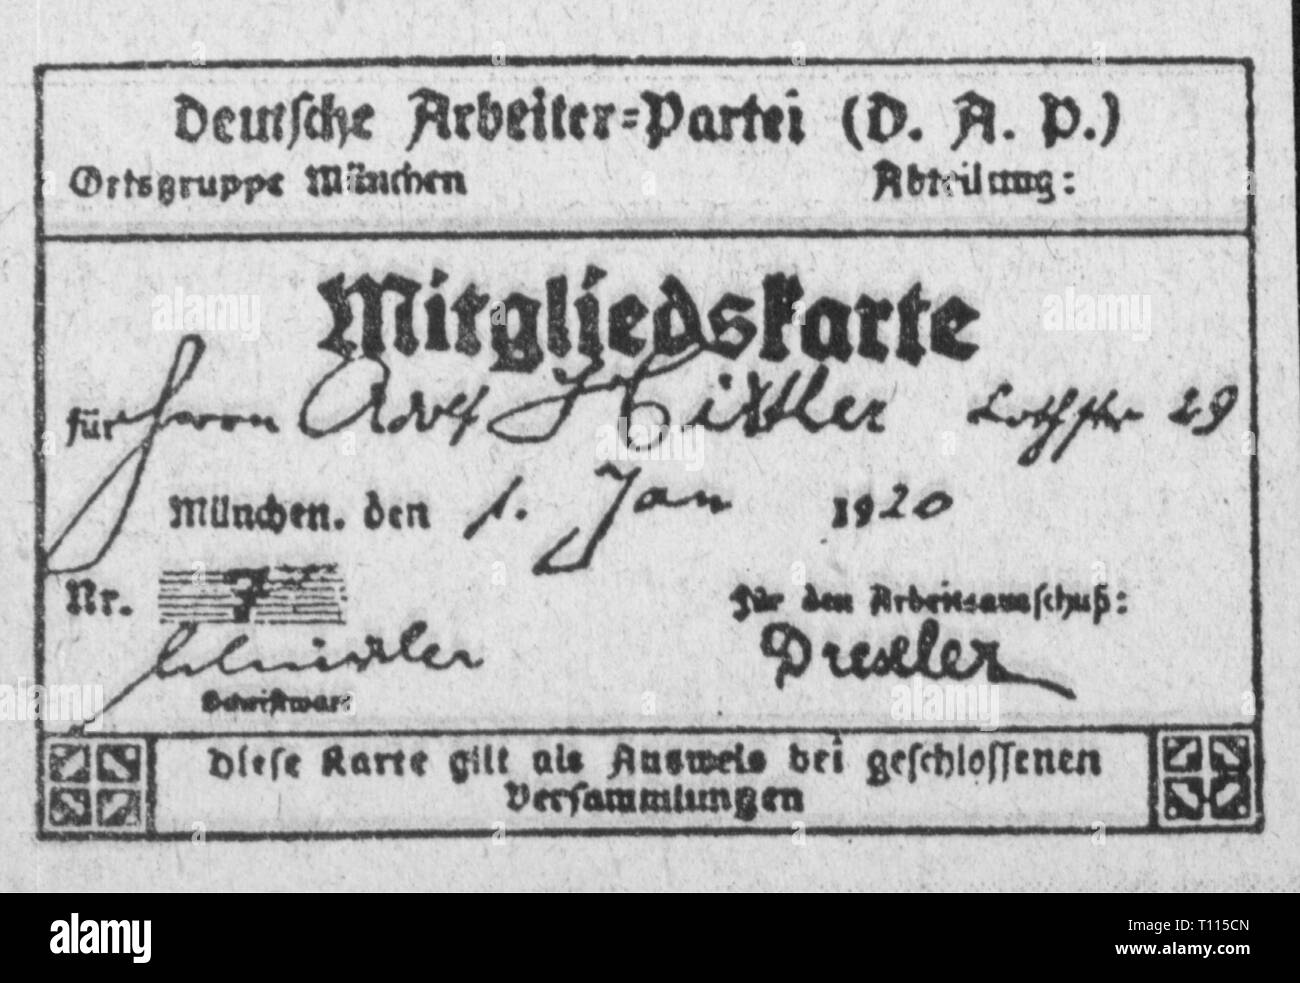 nazism-national-socialism-organisations-party-organisation-second-membership-card-the-deutschen-arbeiterpartei-german-labour-party-of-adolf-hitler-membership-number-1-munich-111920-refoundation-1925-party-membership-card-party-member-member-of-a-party-a-member-of-the-party-nsdap-facsimile-signature-signatures-anton-drexler-dap-politics-policy-germany-german-reich-weimar-republic-20th-century-1920s-organisations-organizations-organization-organisation-membership-card-membership-cards-labour-party-labour-partie-additional-rights-clearance-info-not-available-T115CN.jpg